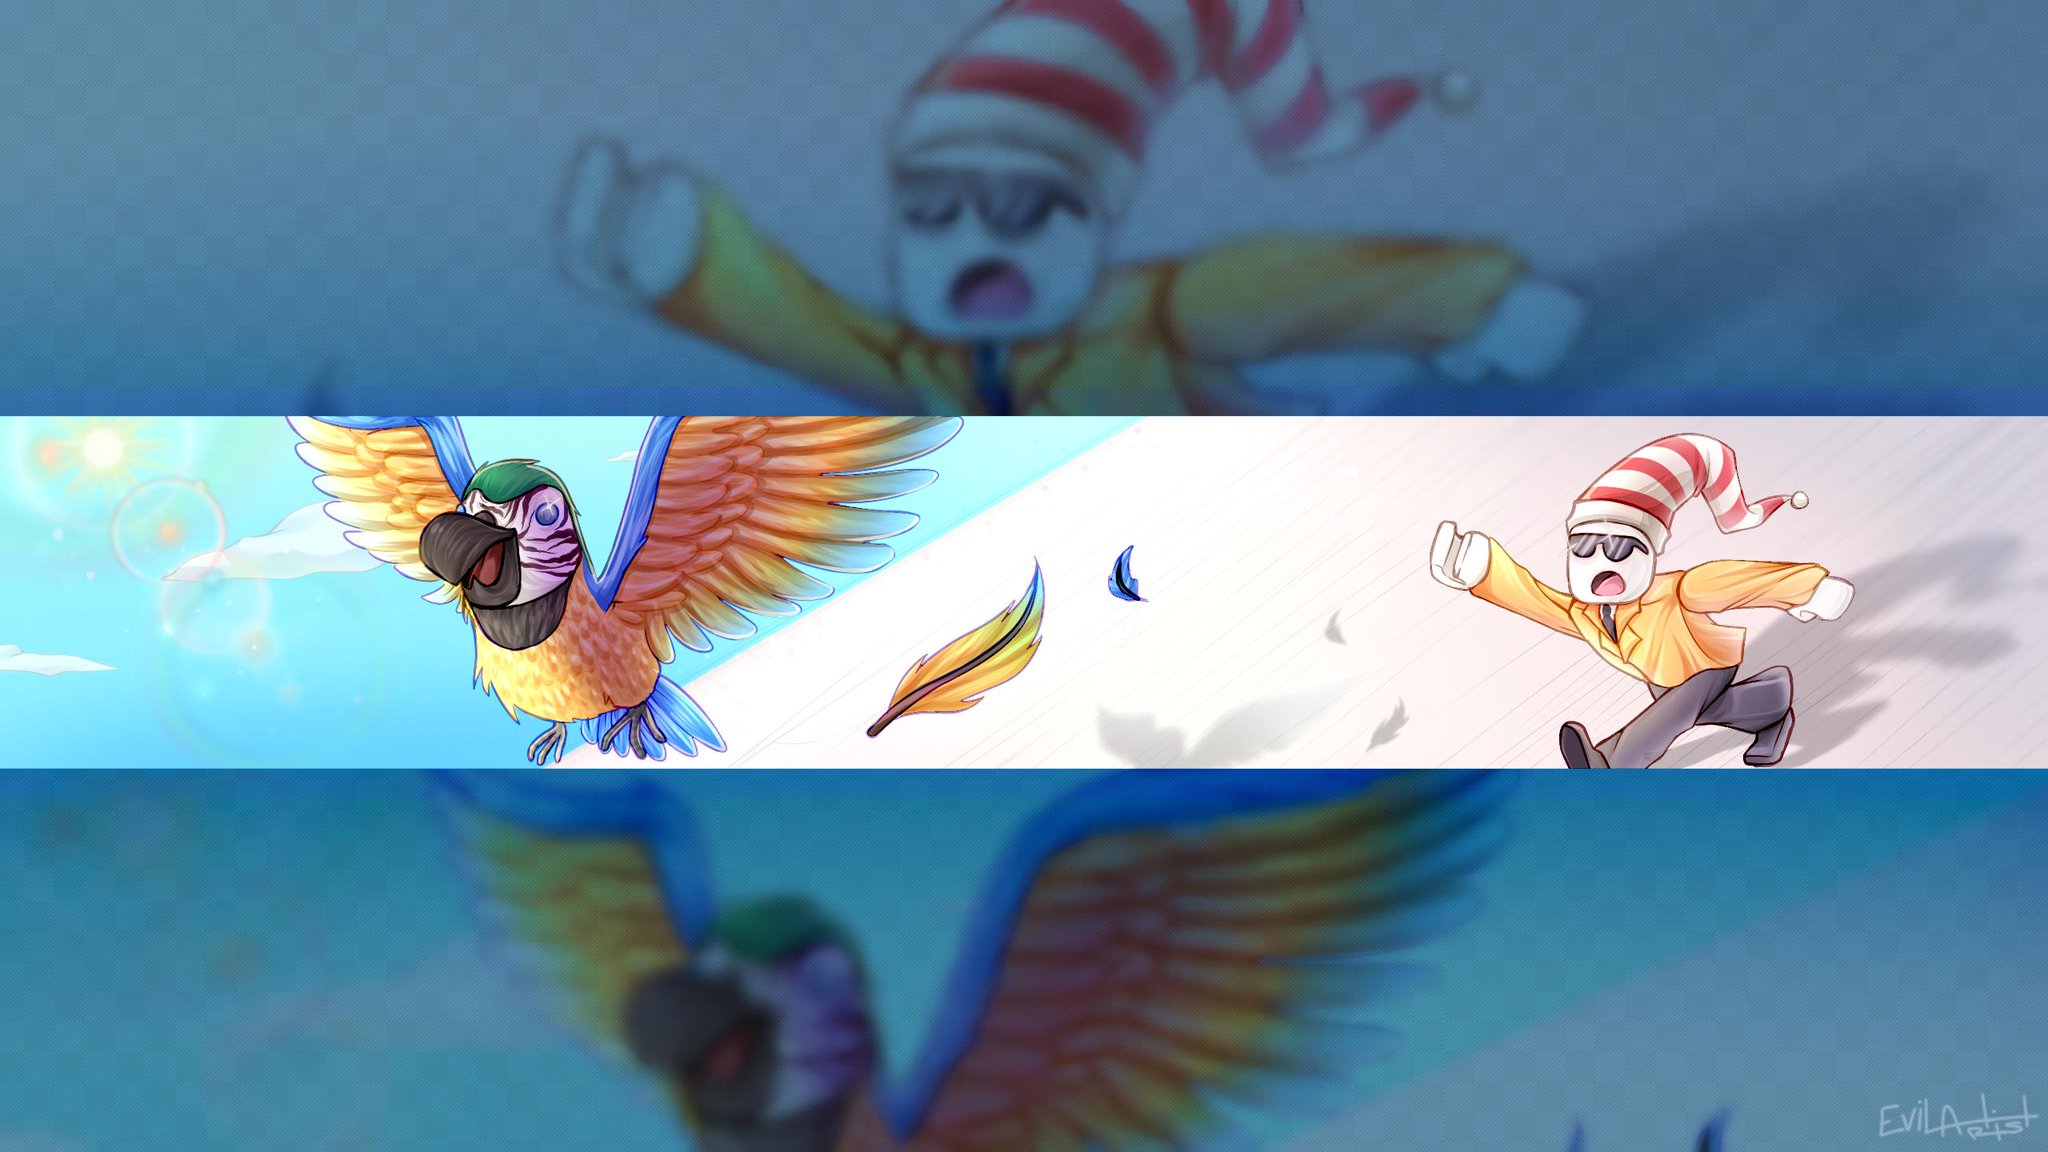 Evilartist On Twitter Banner And Pic For Antster Thank You Sm For Commissioning Me To Do These If You Re Interested In Seeing The Process Of How The Banner Was Made I - banner roblox 2048x1152